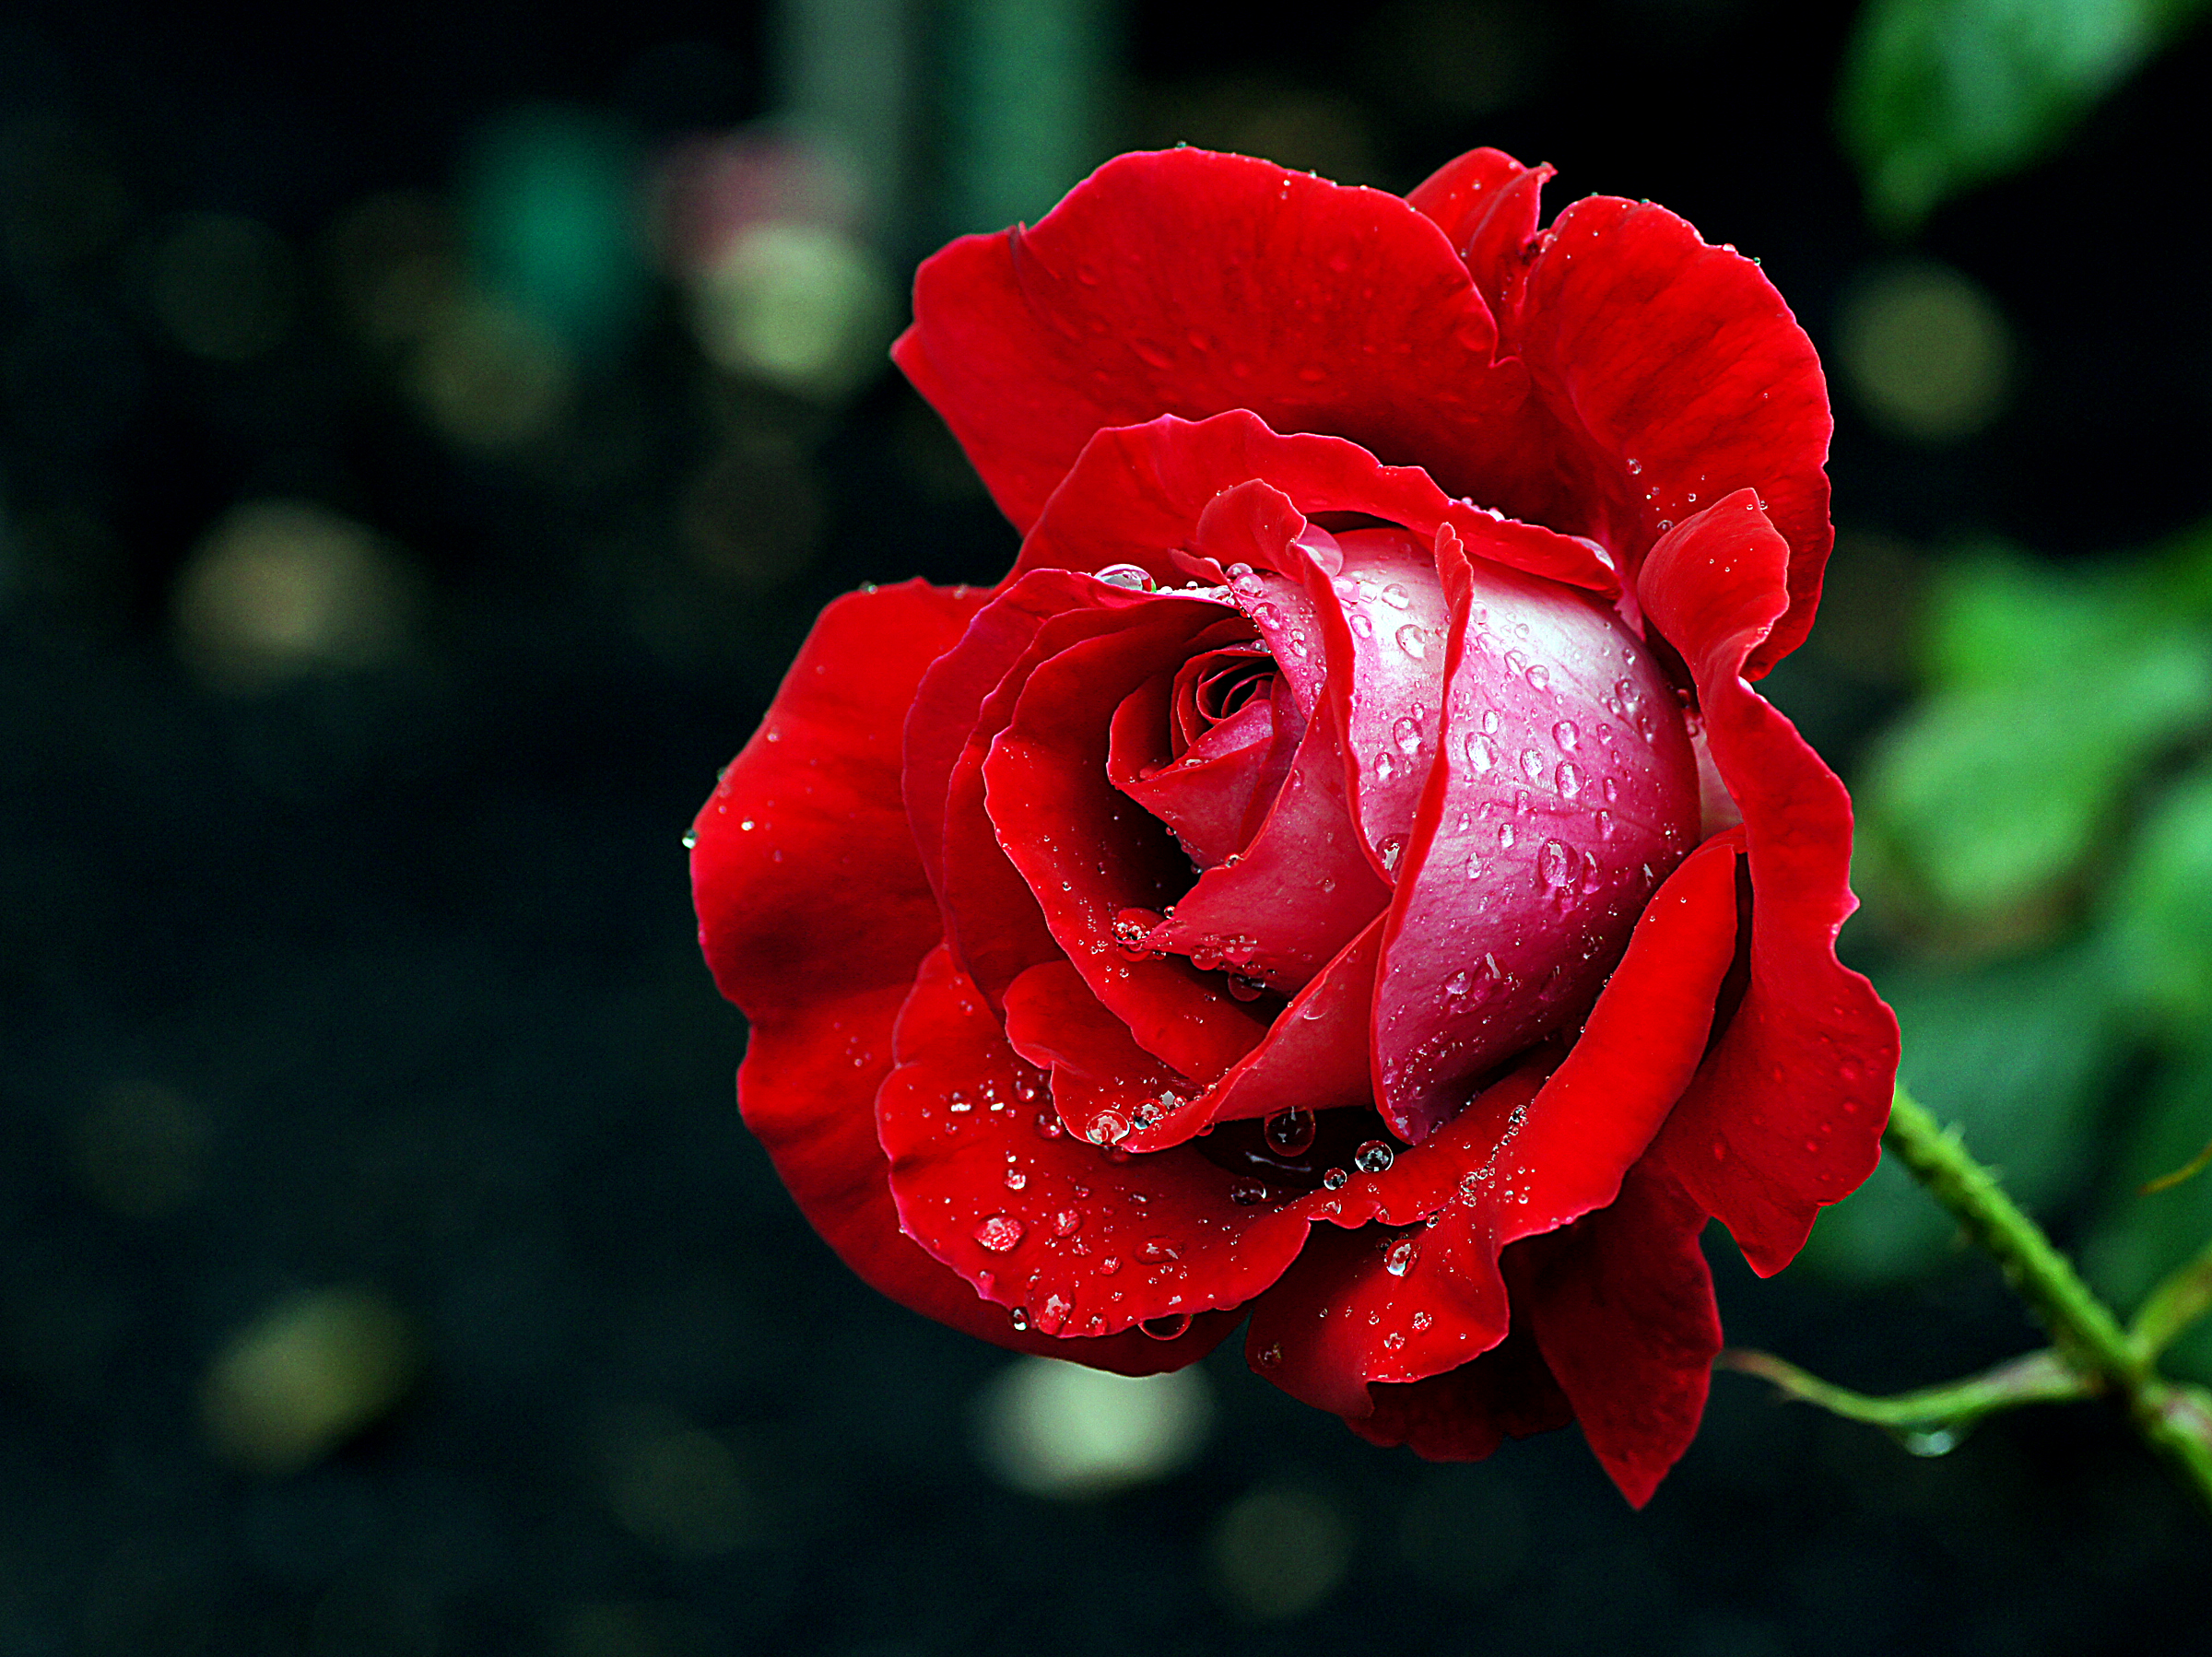 Free photo Red rose with drops on petals